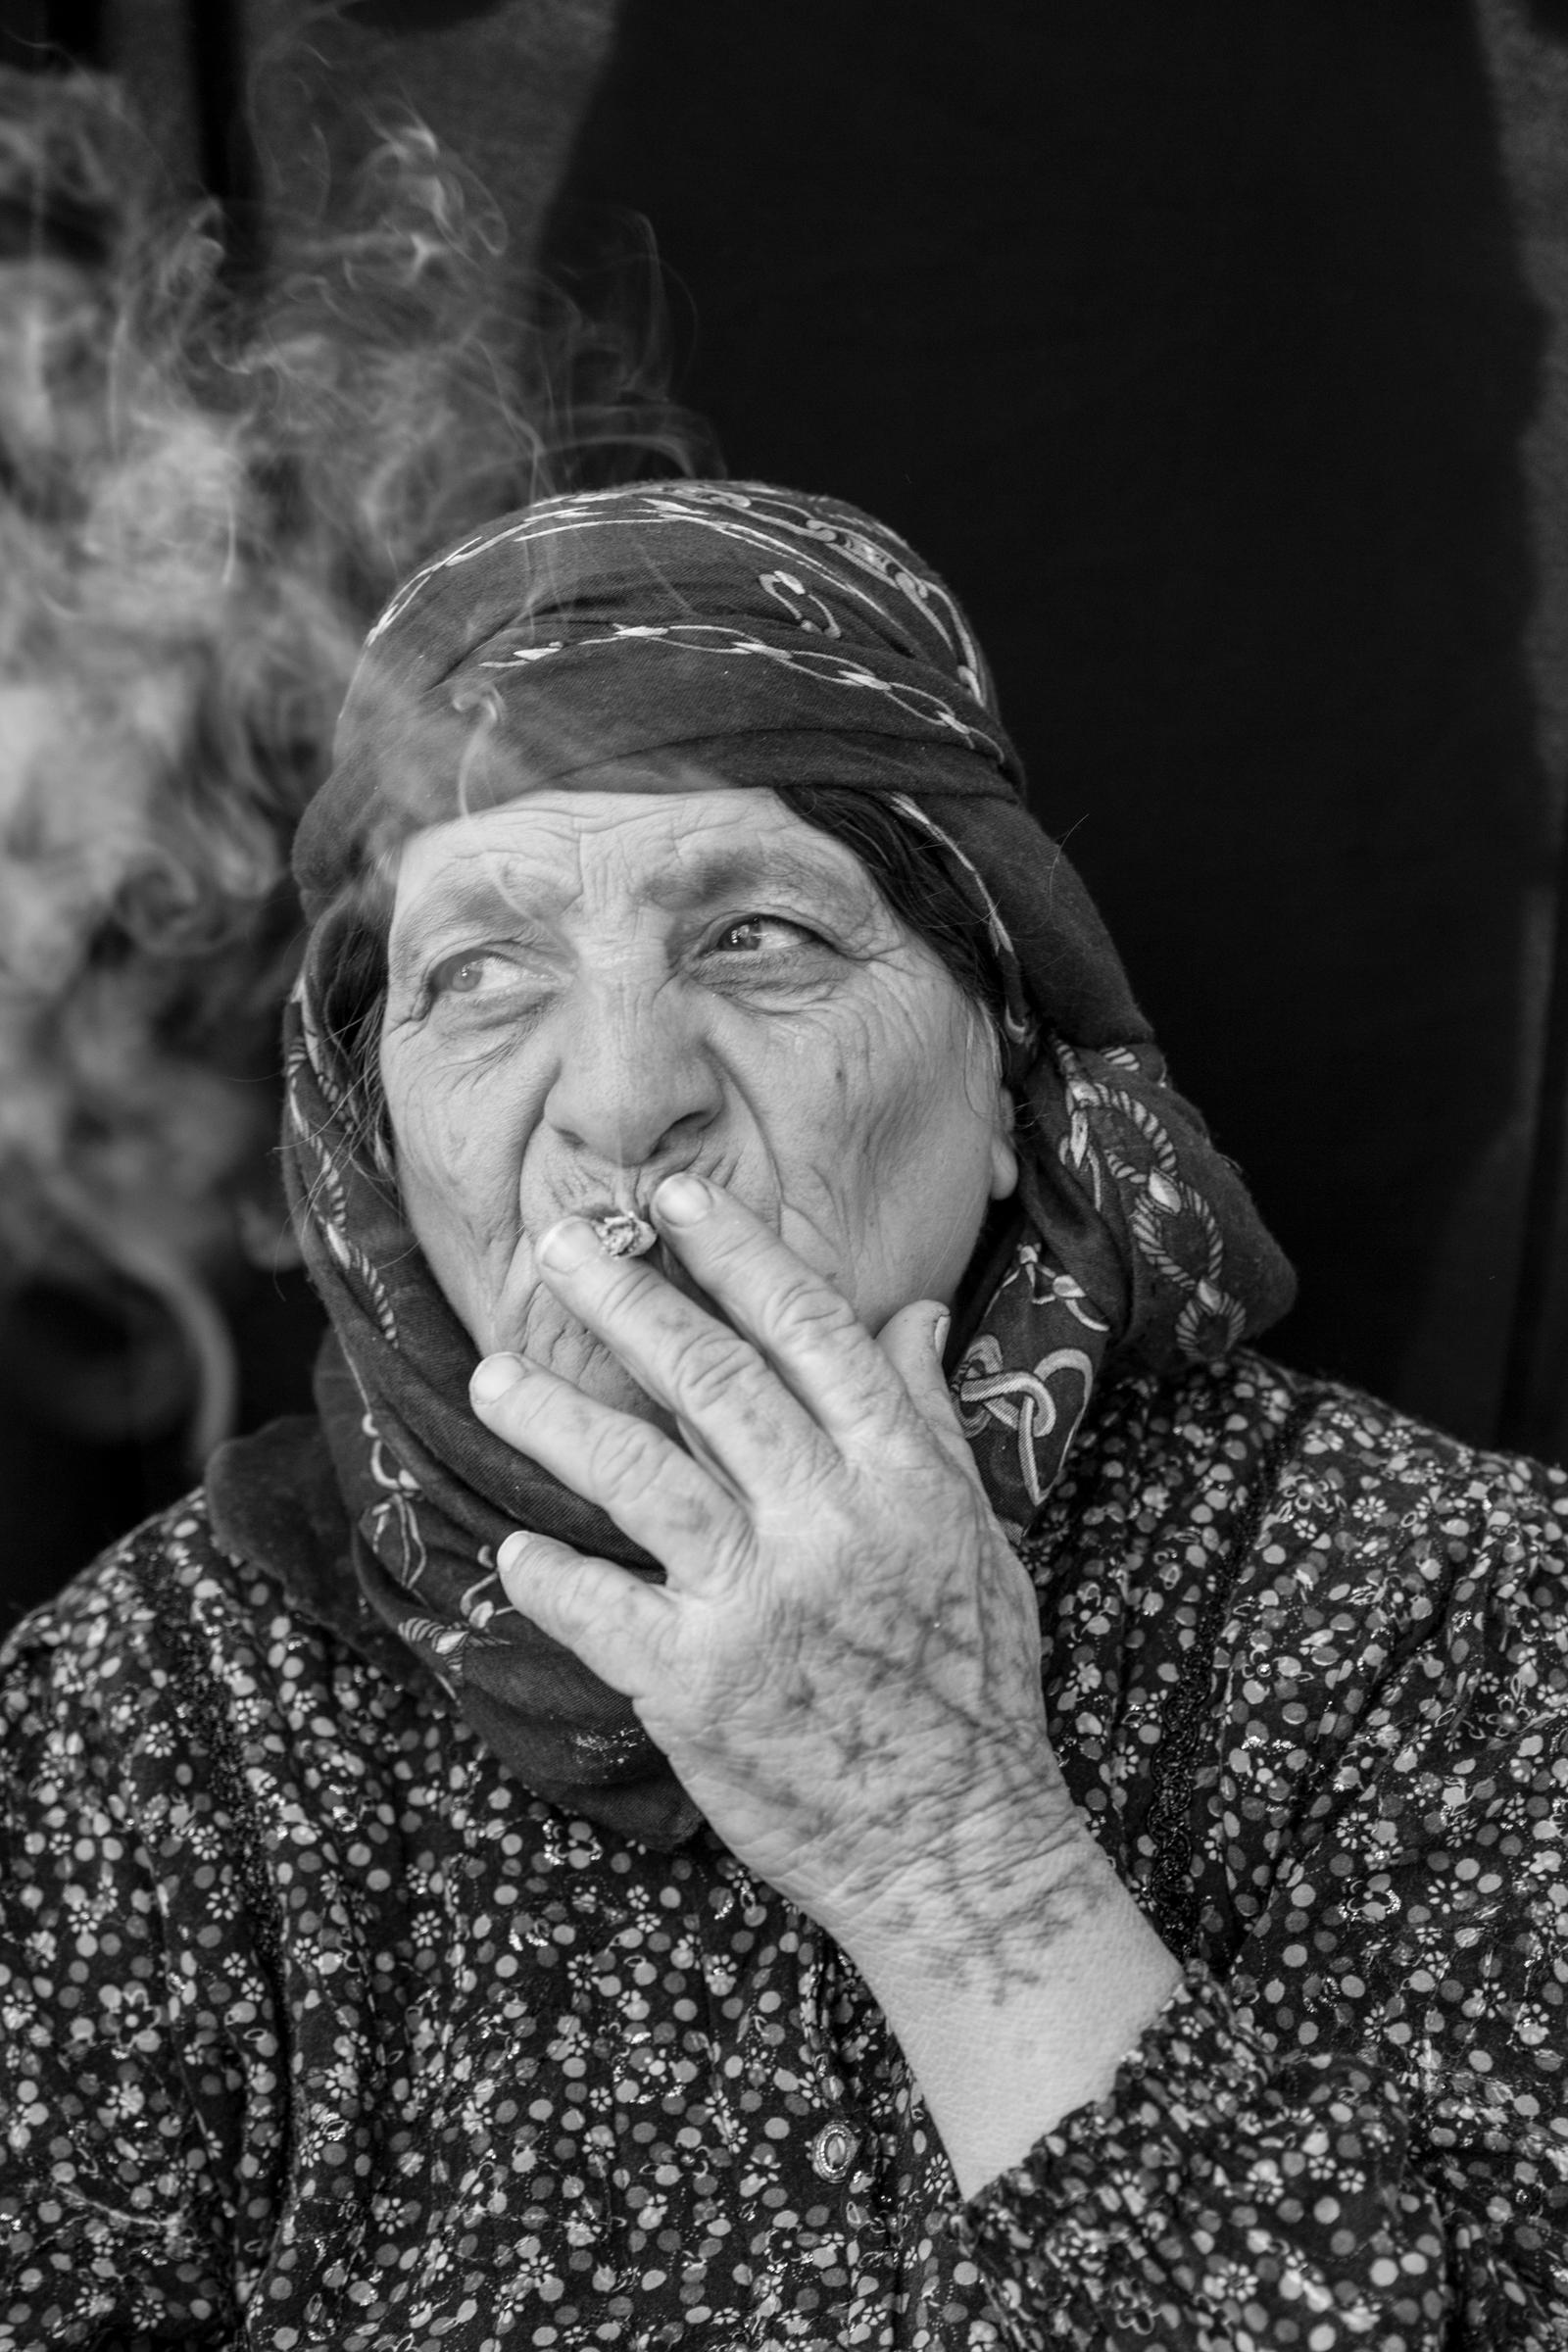 Zubeyda Ali, 60, who fled Kobani with her whole family, including ten married children and 25 grandchildren, was tattooed at the age of 13. She has a large tattoo on her left hand and some small inverted 